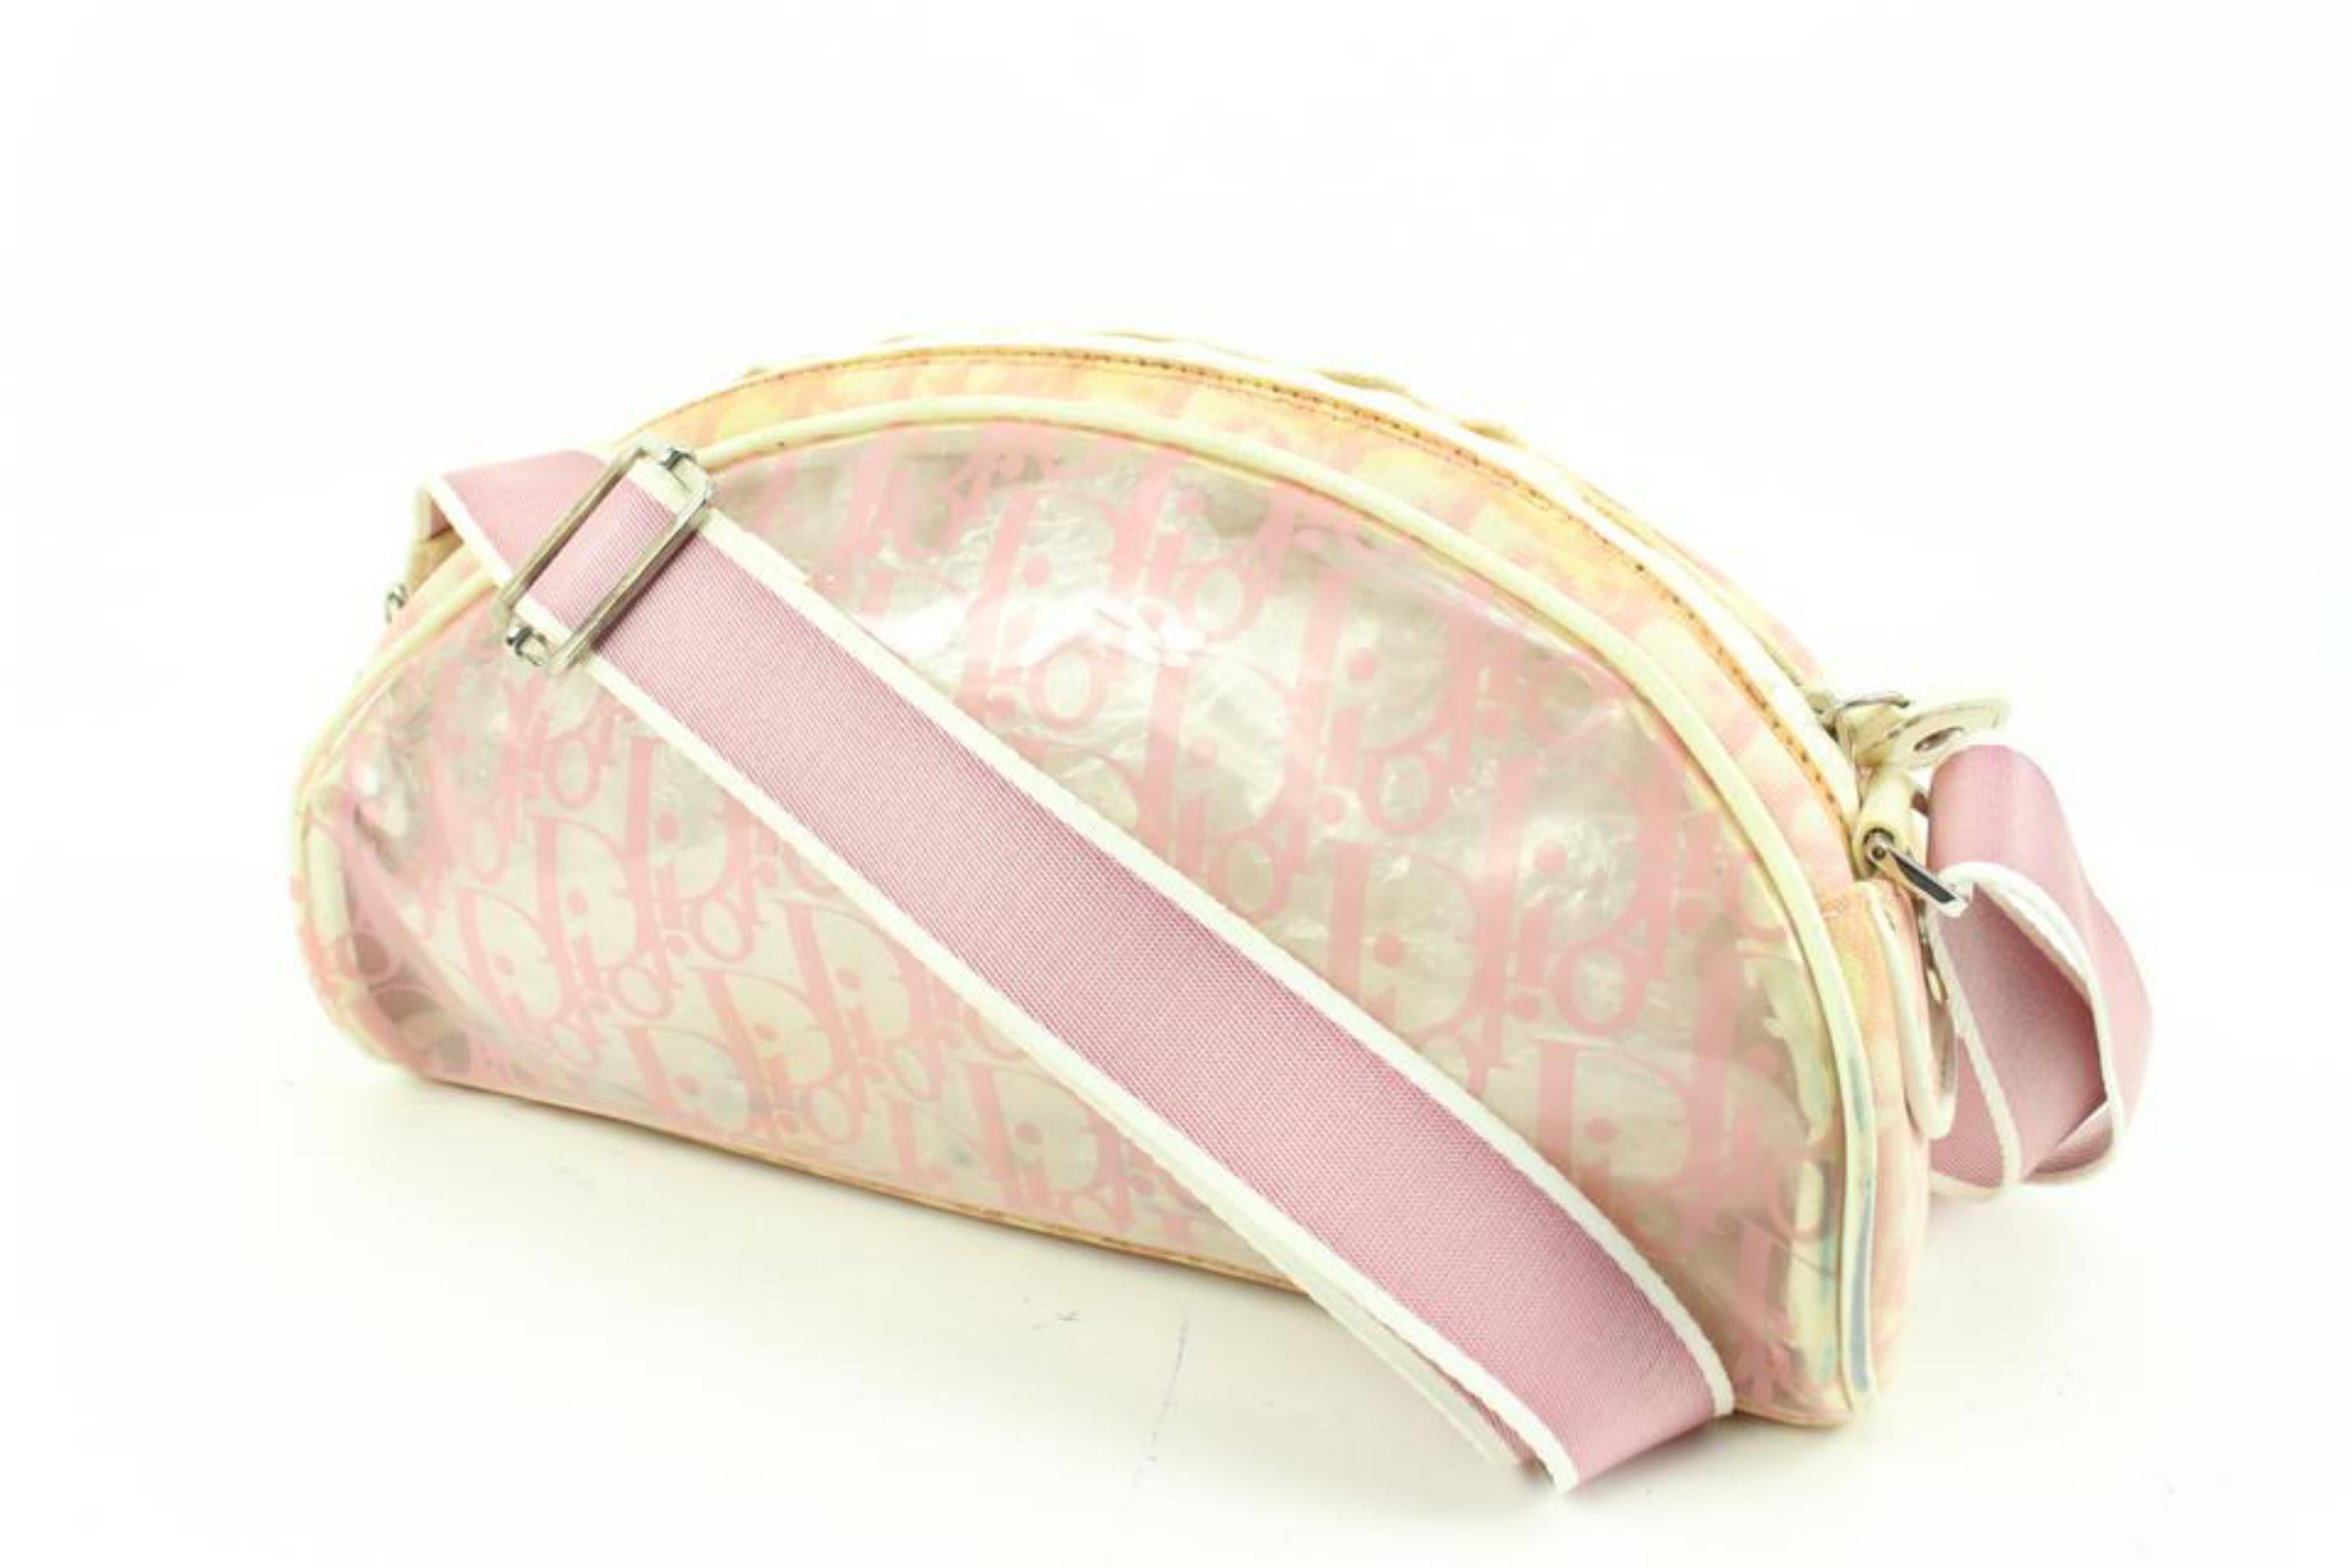 Dior Pink Translucent Monogram Trotter Crossbody Bag  31d413s
Date Code/Serial Number: BO L 0074
Made In: Italy
Measurements: Length:  10